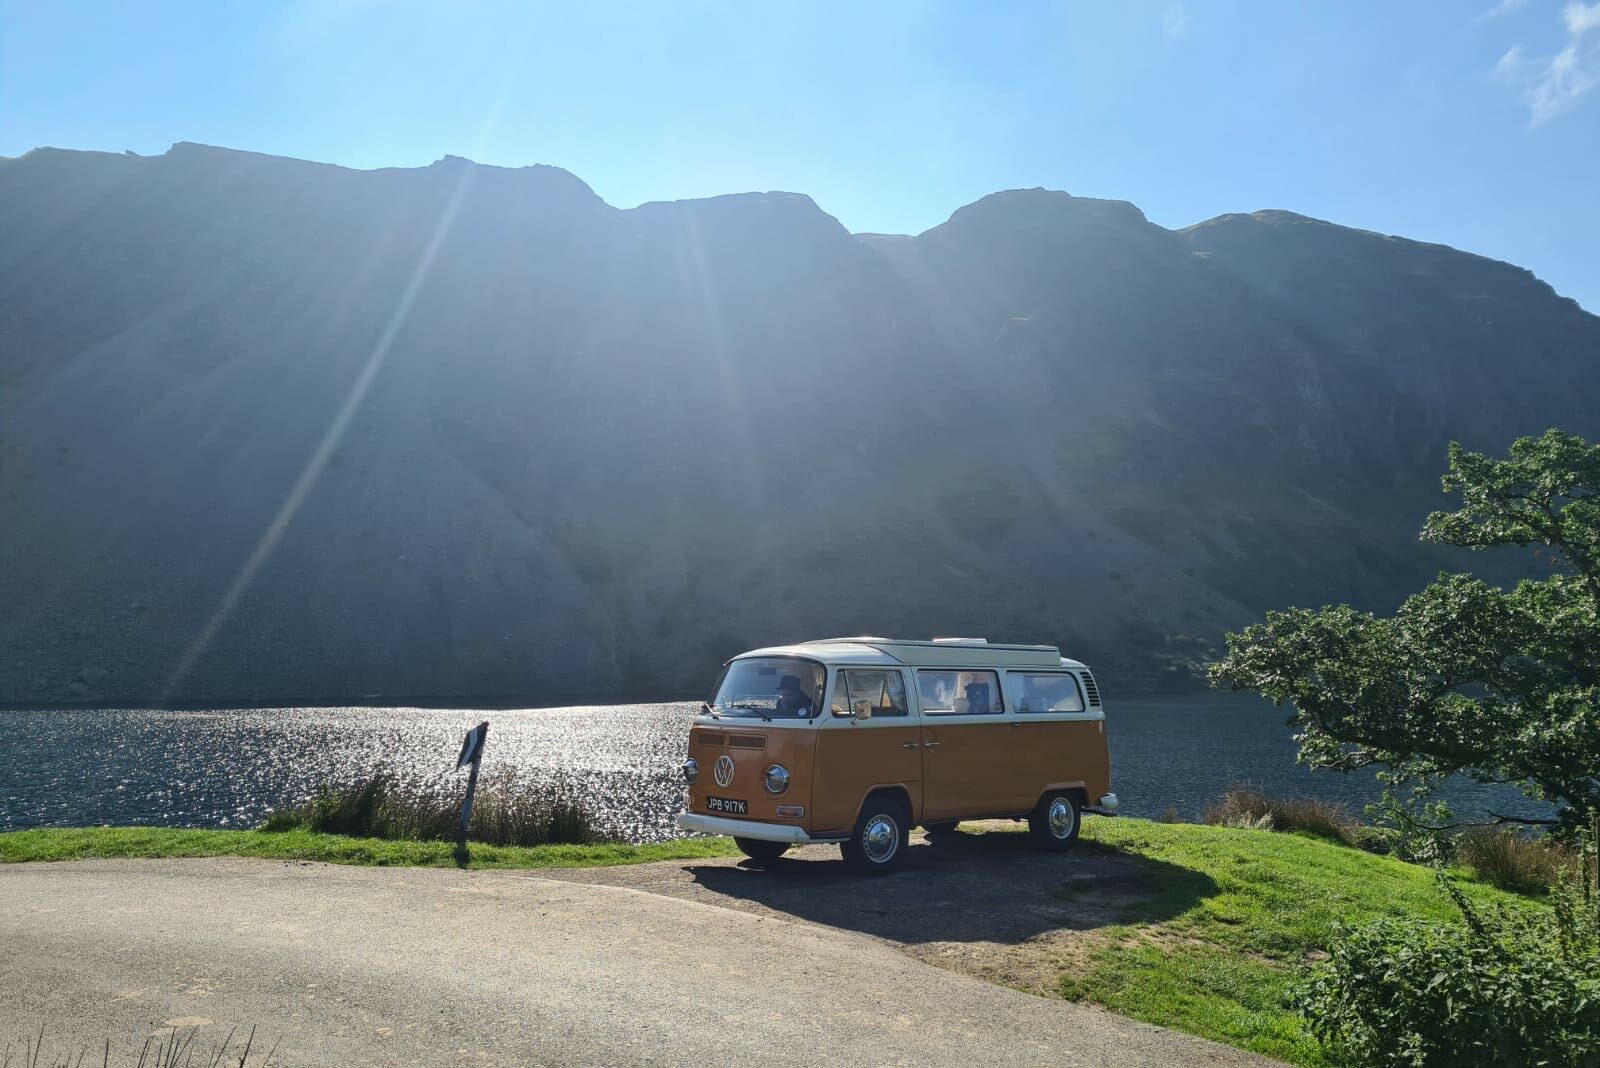 Campervan Betty beside the mountains